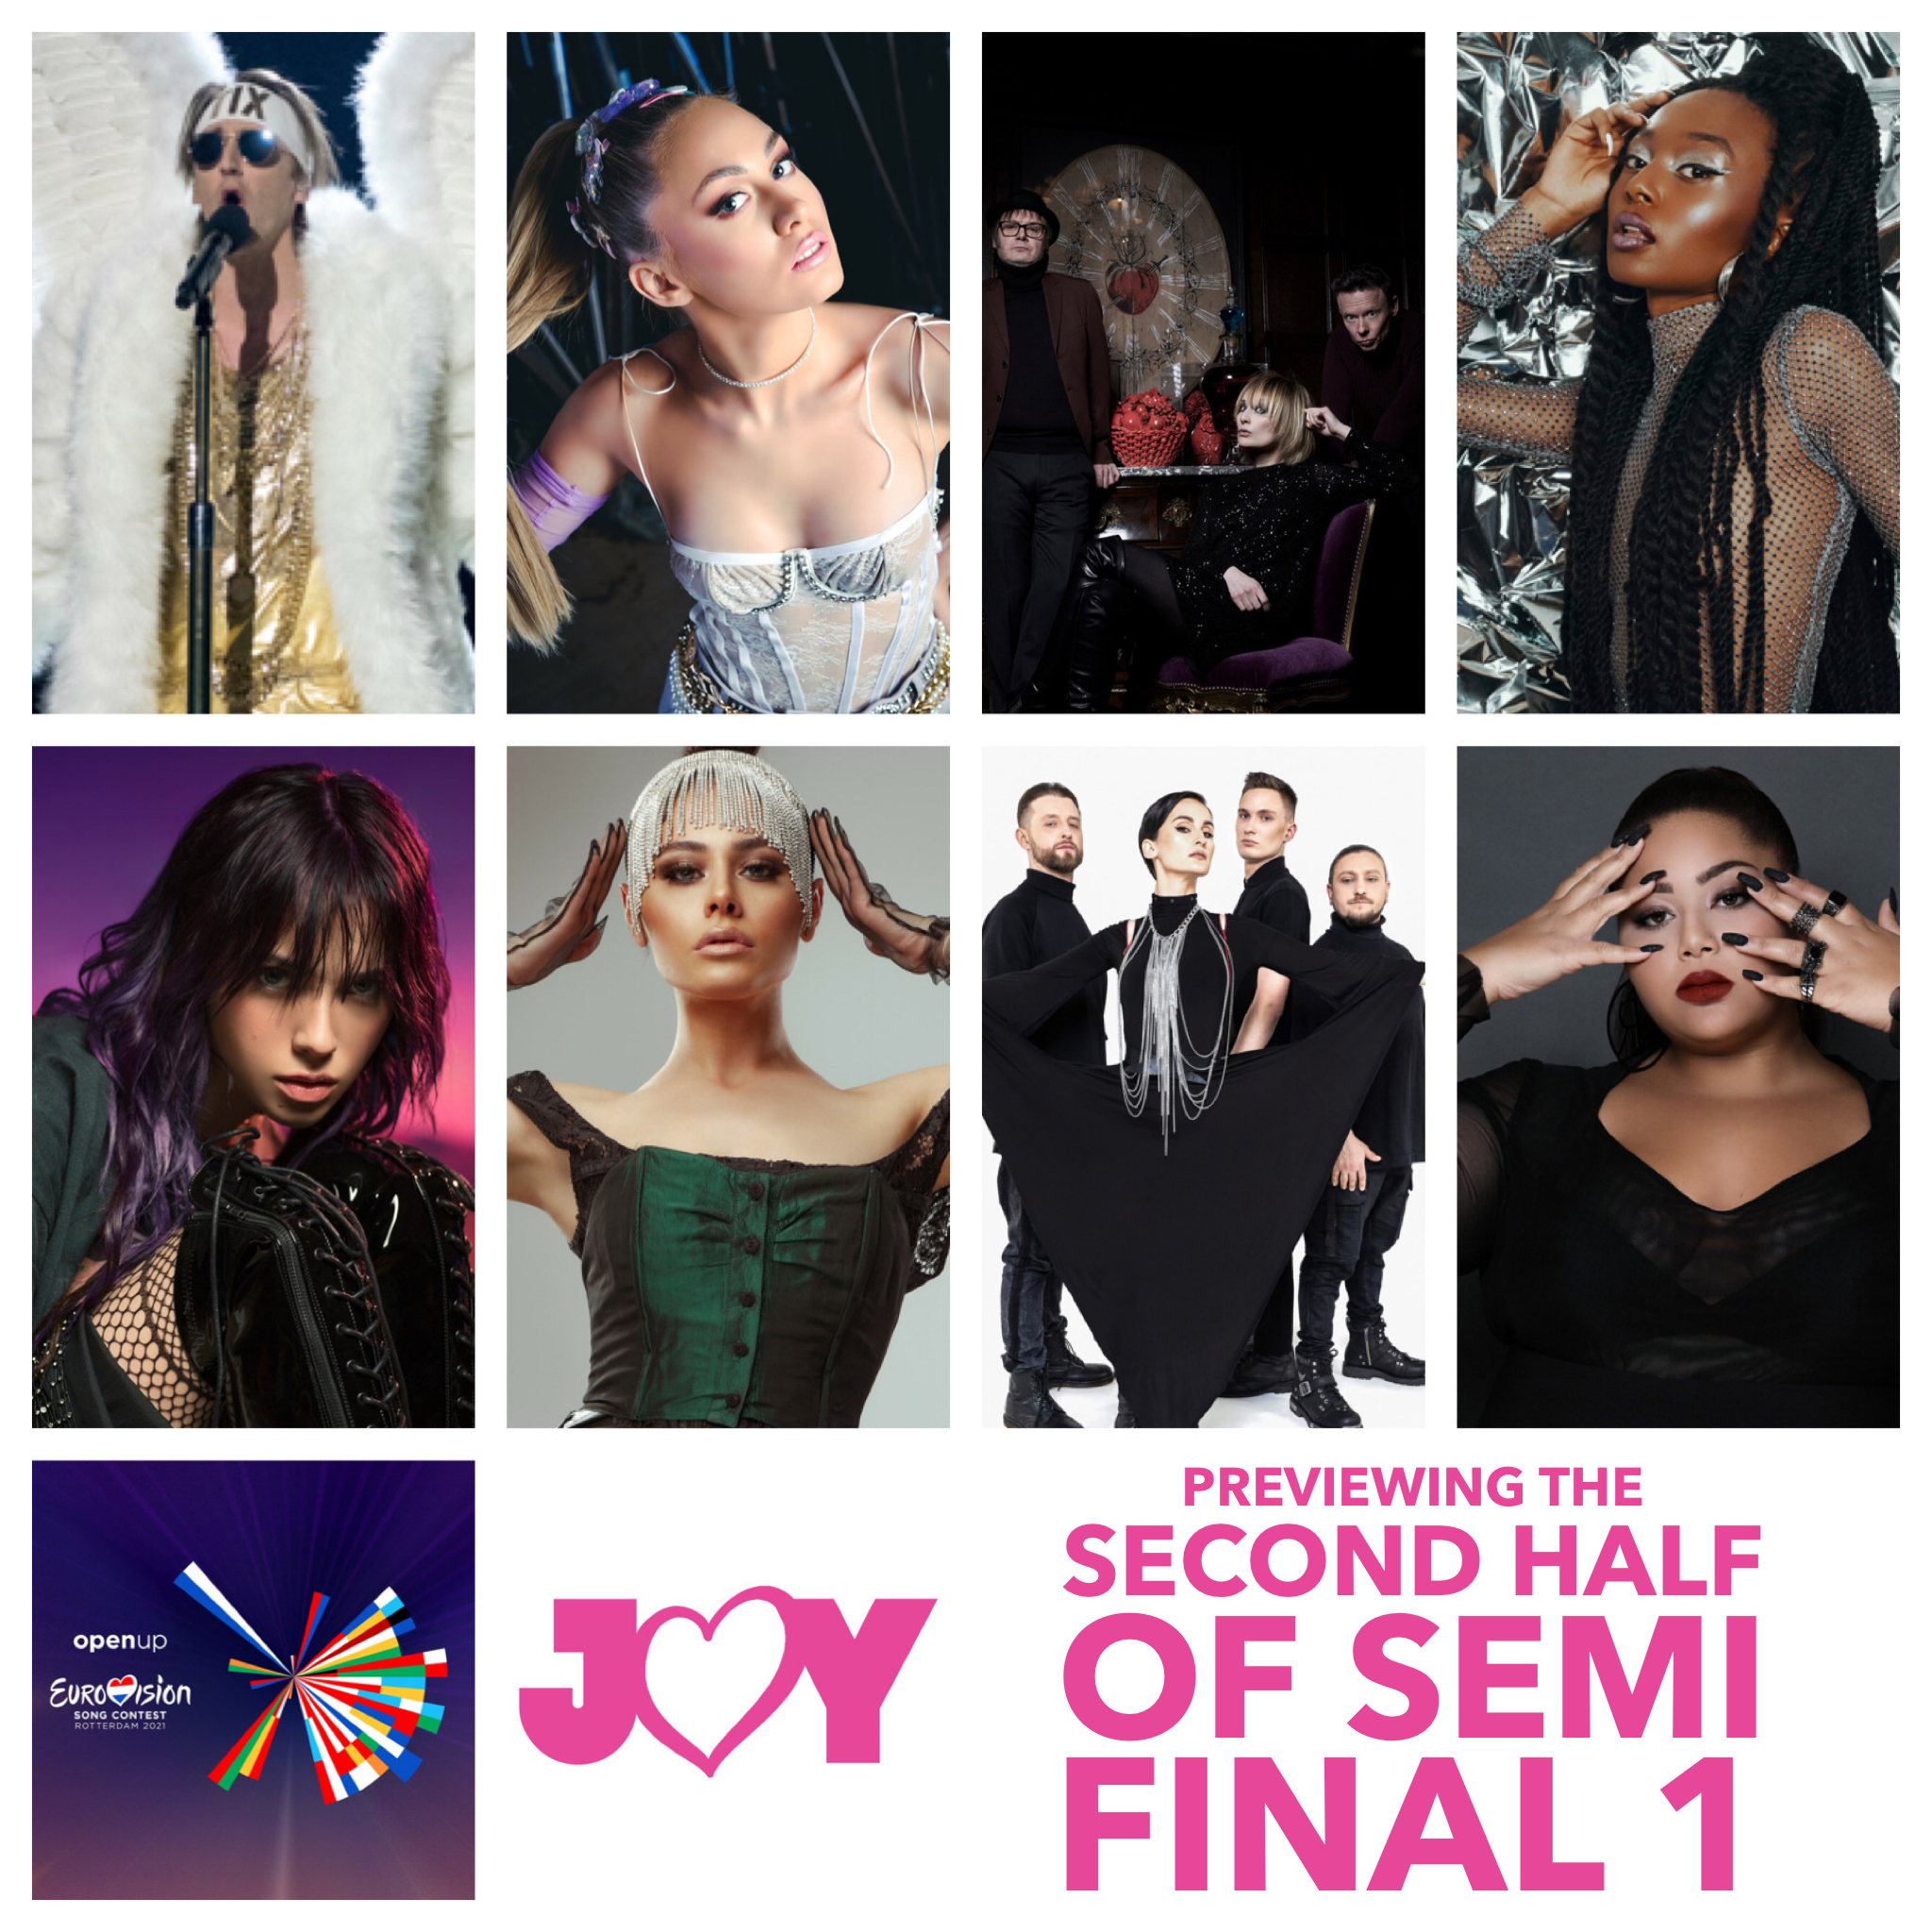 #OpenUp: Previewing the second half of Eurovision 2021 Semi Final 1